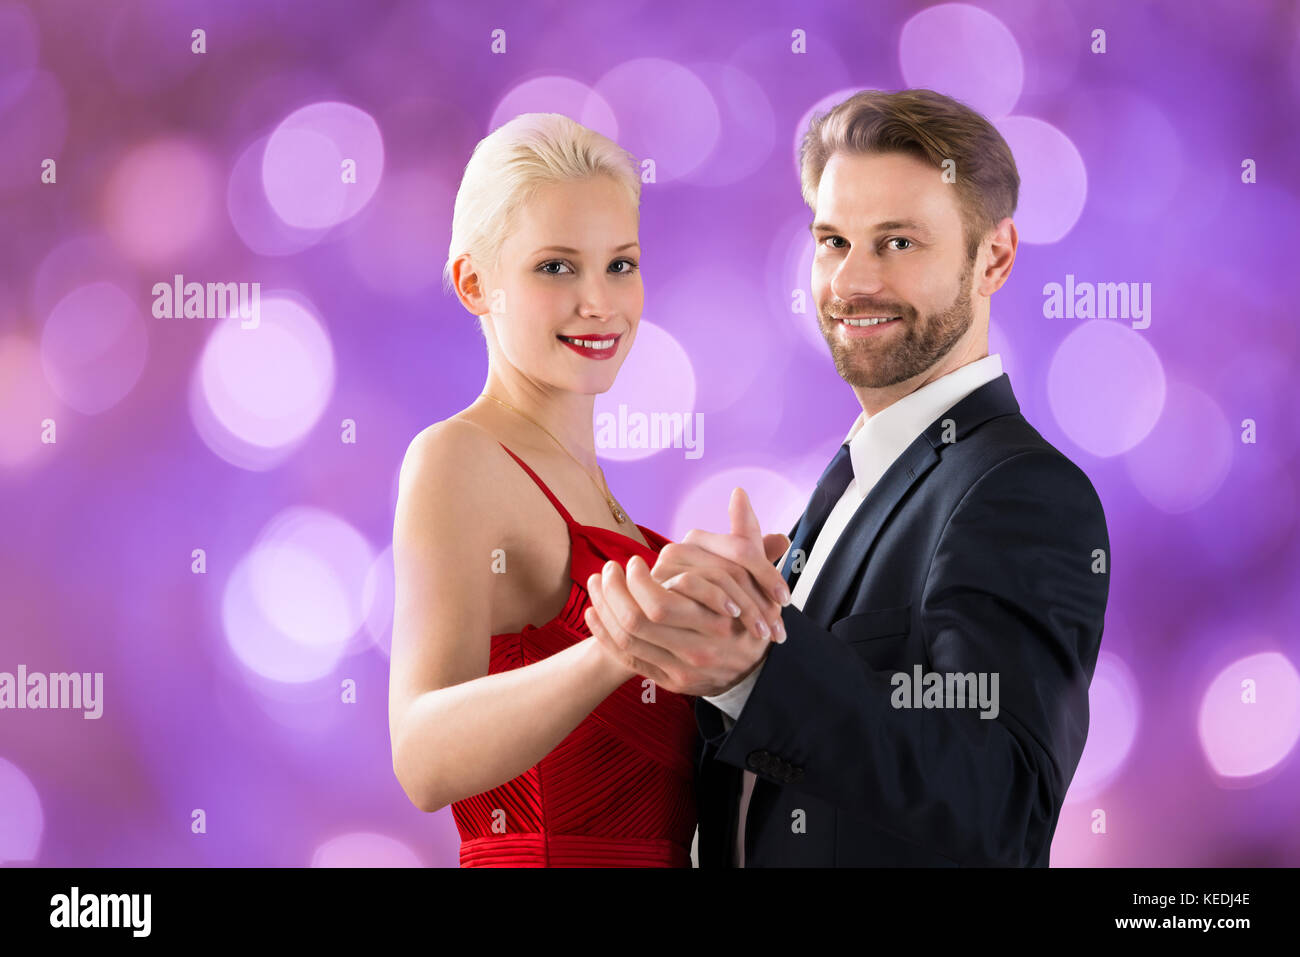 Portrait Of Young Happy Couple Dancing On Bokeh Background Stock Photo